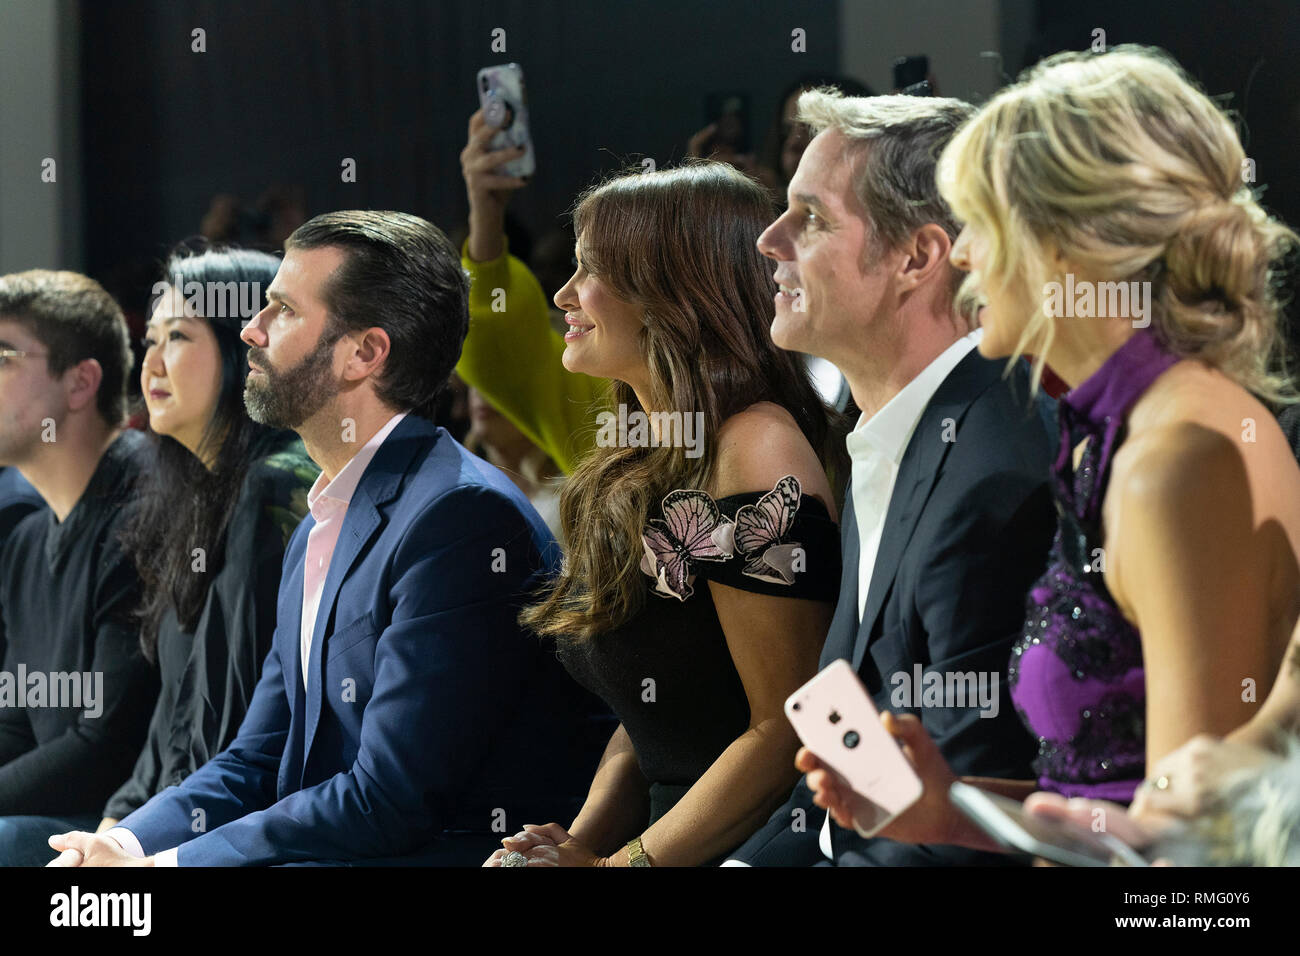 Susan Shin, Donald Trump Jr., Kimberly Guilfoyle, Bill Hemmer and Marla Maples attend runway for Zang Toi Fall/Winter collection during New York Fashion Week at Spring Studios (Photo by Lev Radin / Pacific Press) Stock Photo